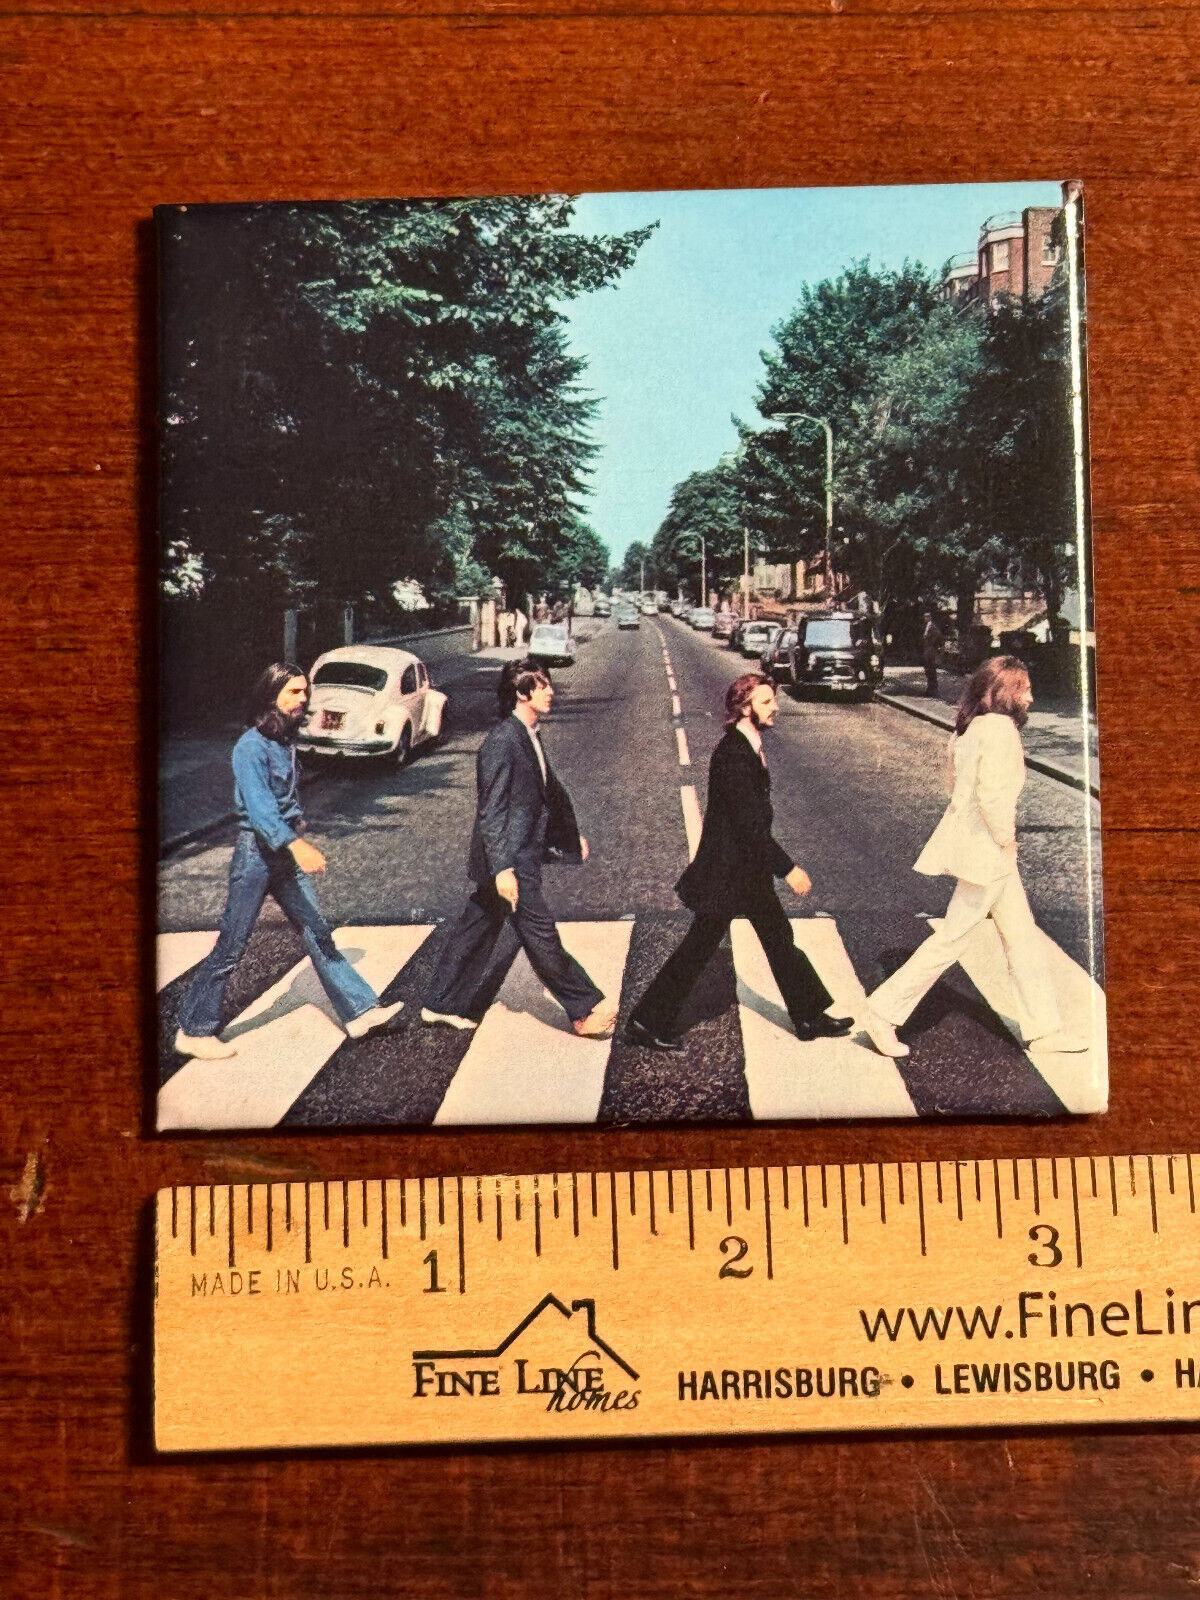 The Beatles Abbey Road on a 3”x3” Metal Refrigerator Magnet-Nice-FAST SHIPPING